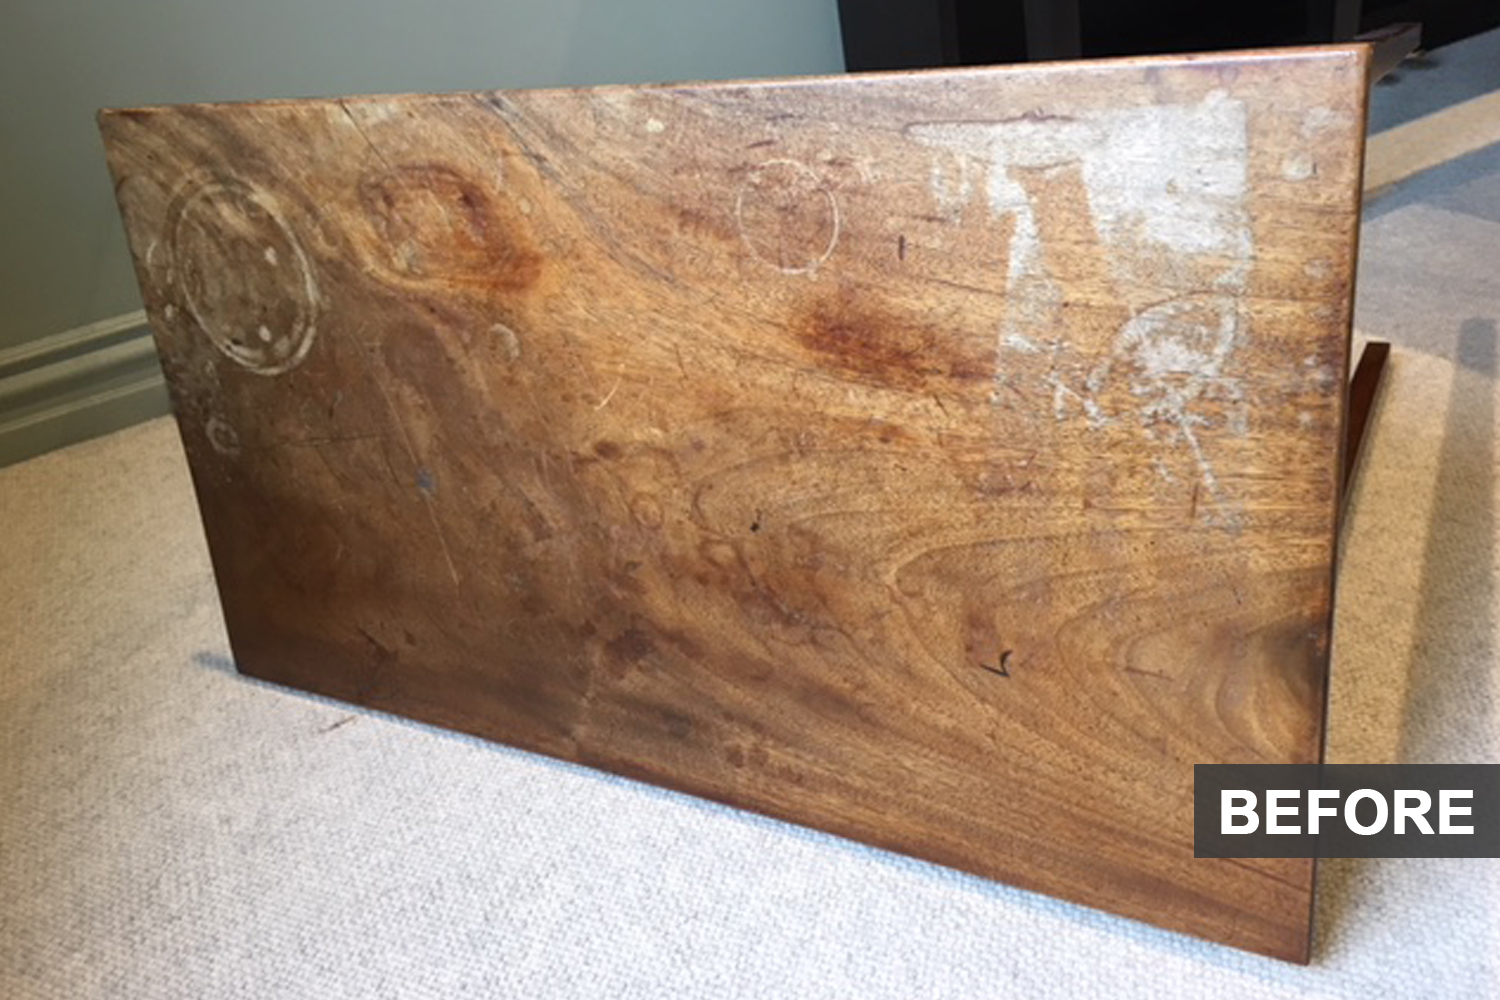  Wooden table with stain, before restoration